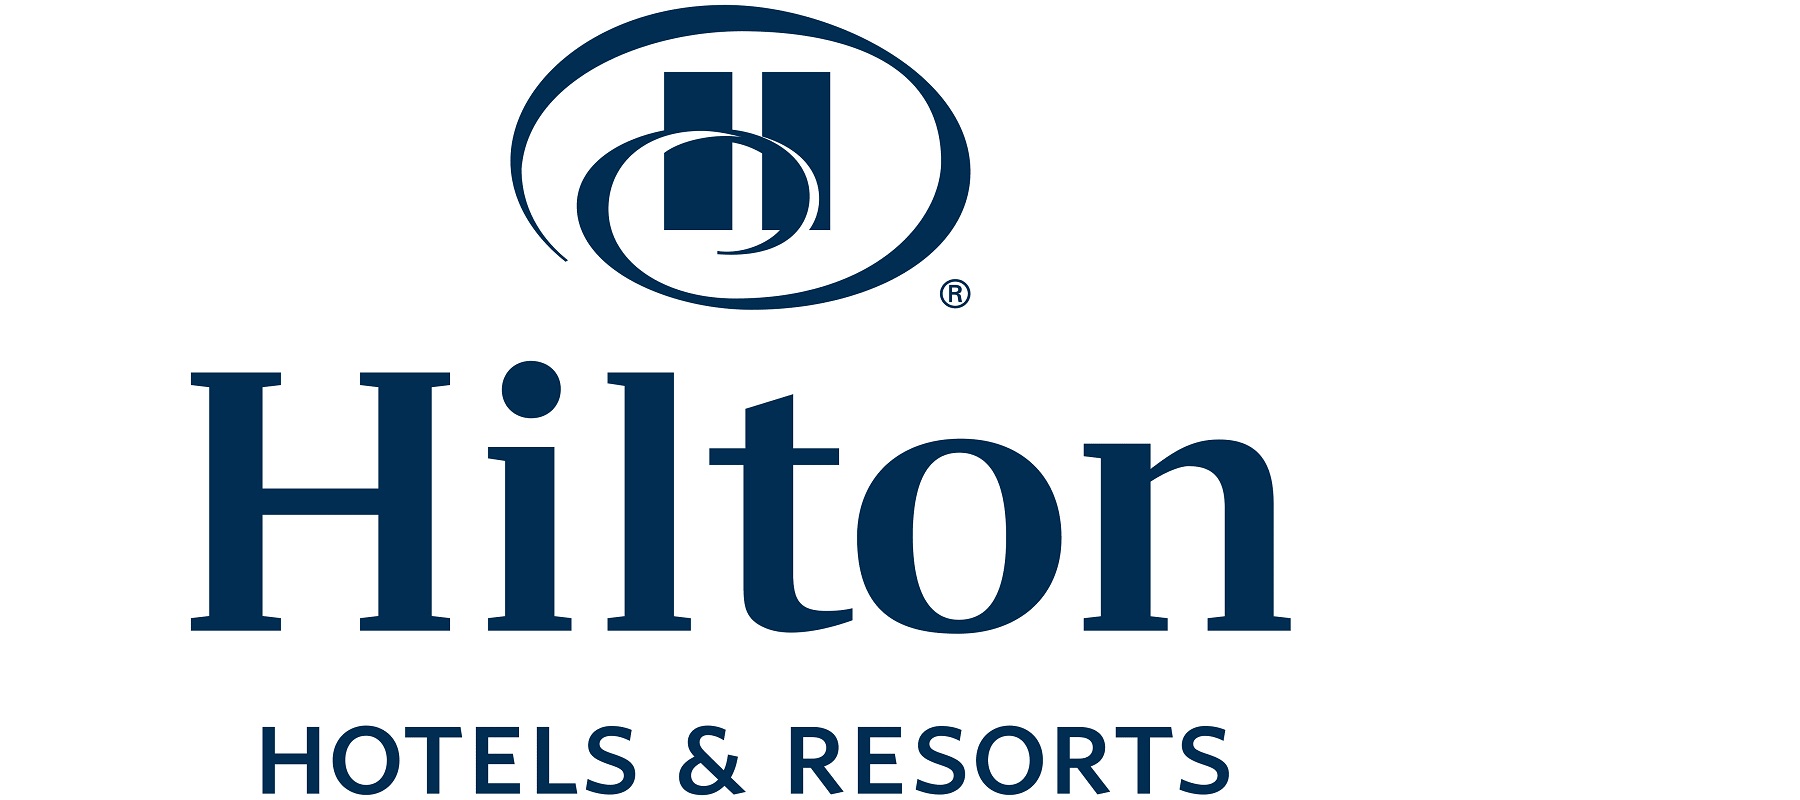 Hilton is the world’s most valuable hotel brand, report